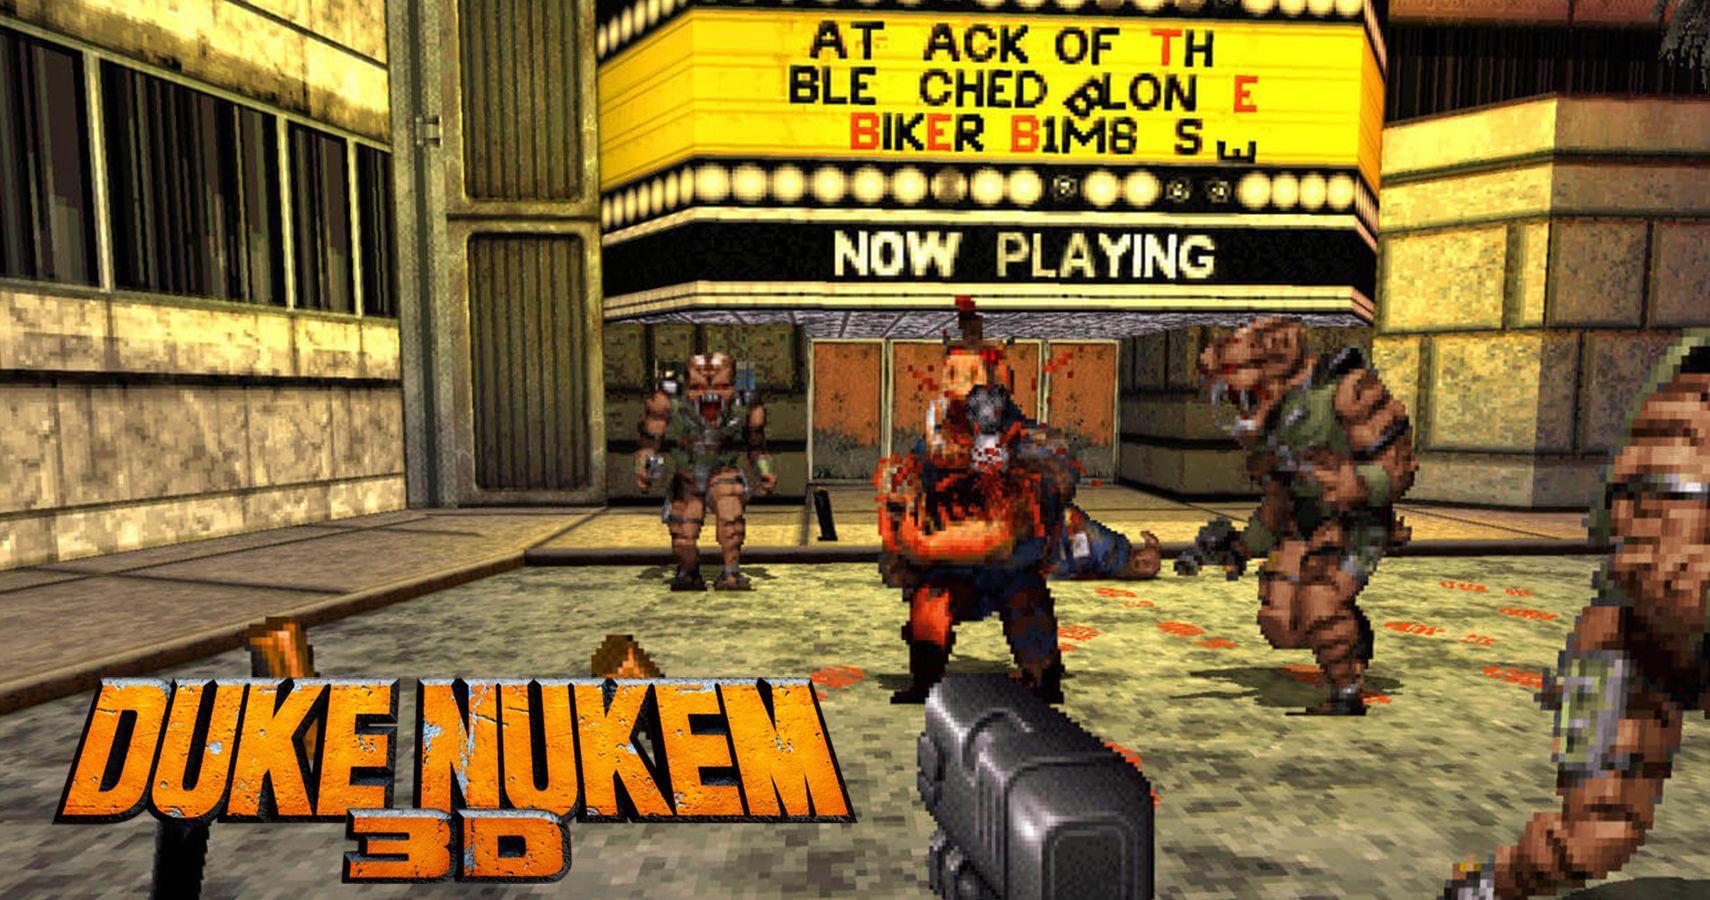 Duke Nukem 3d In game screenshot with logo in foreground